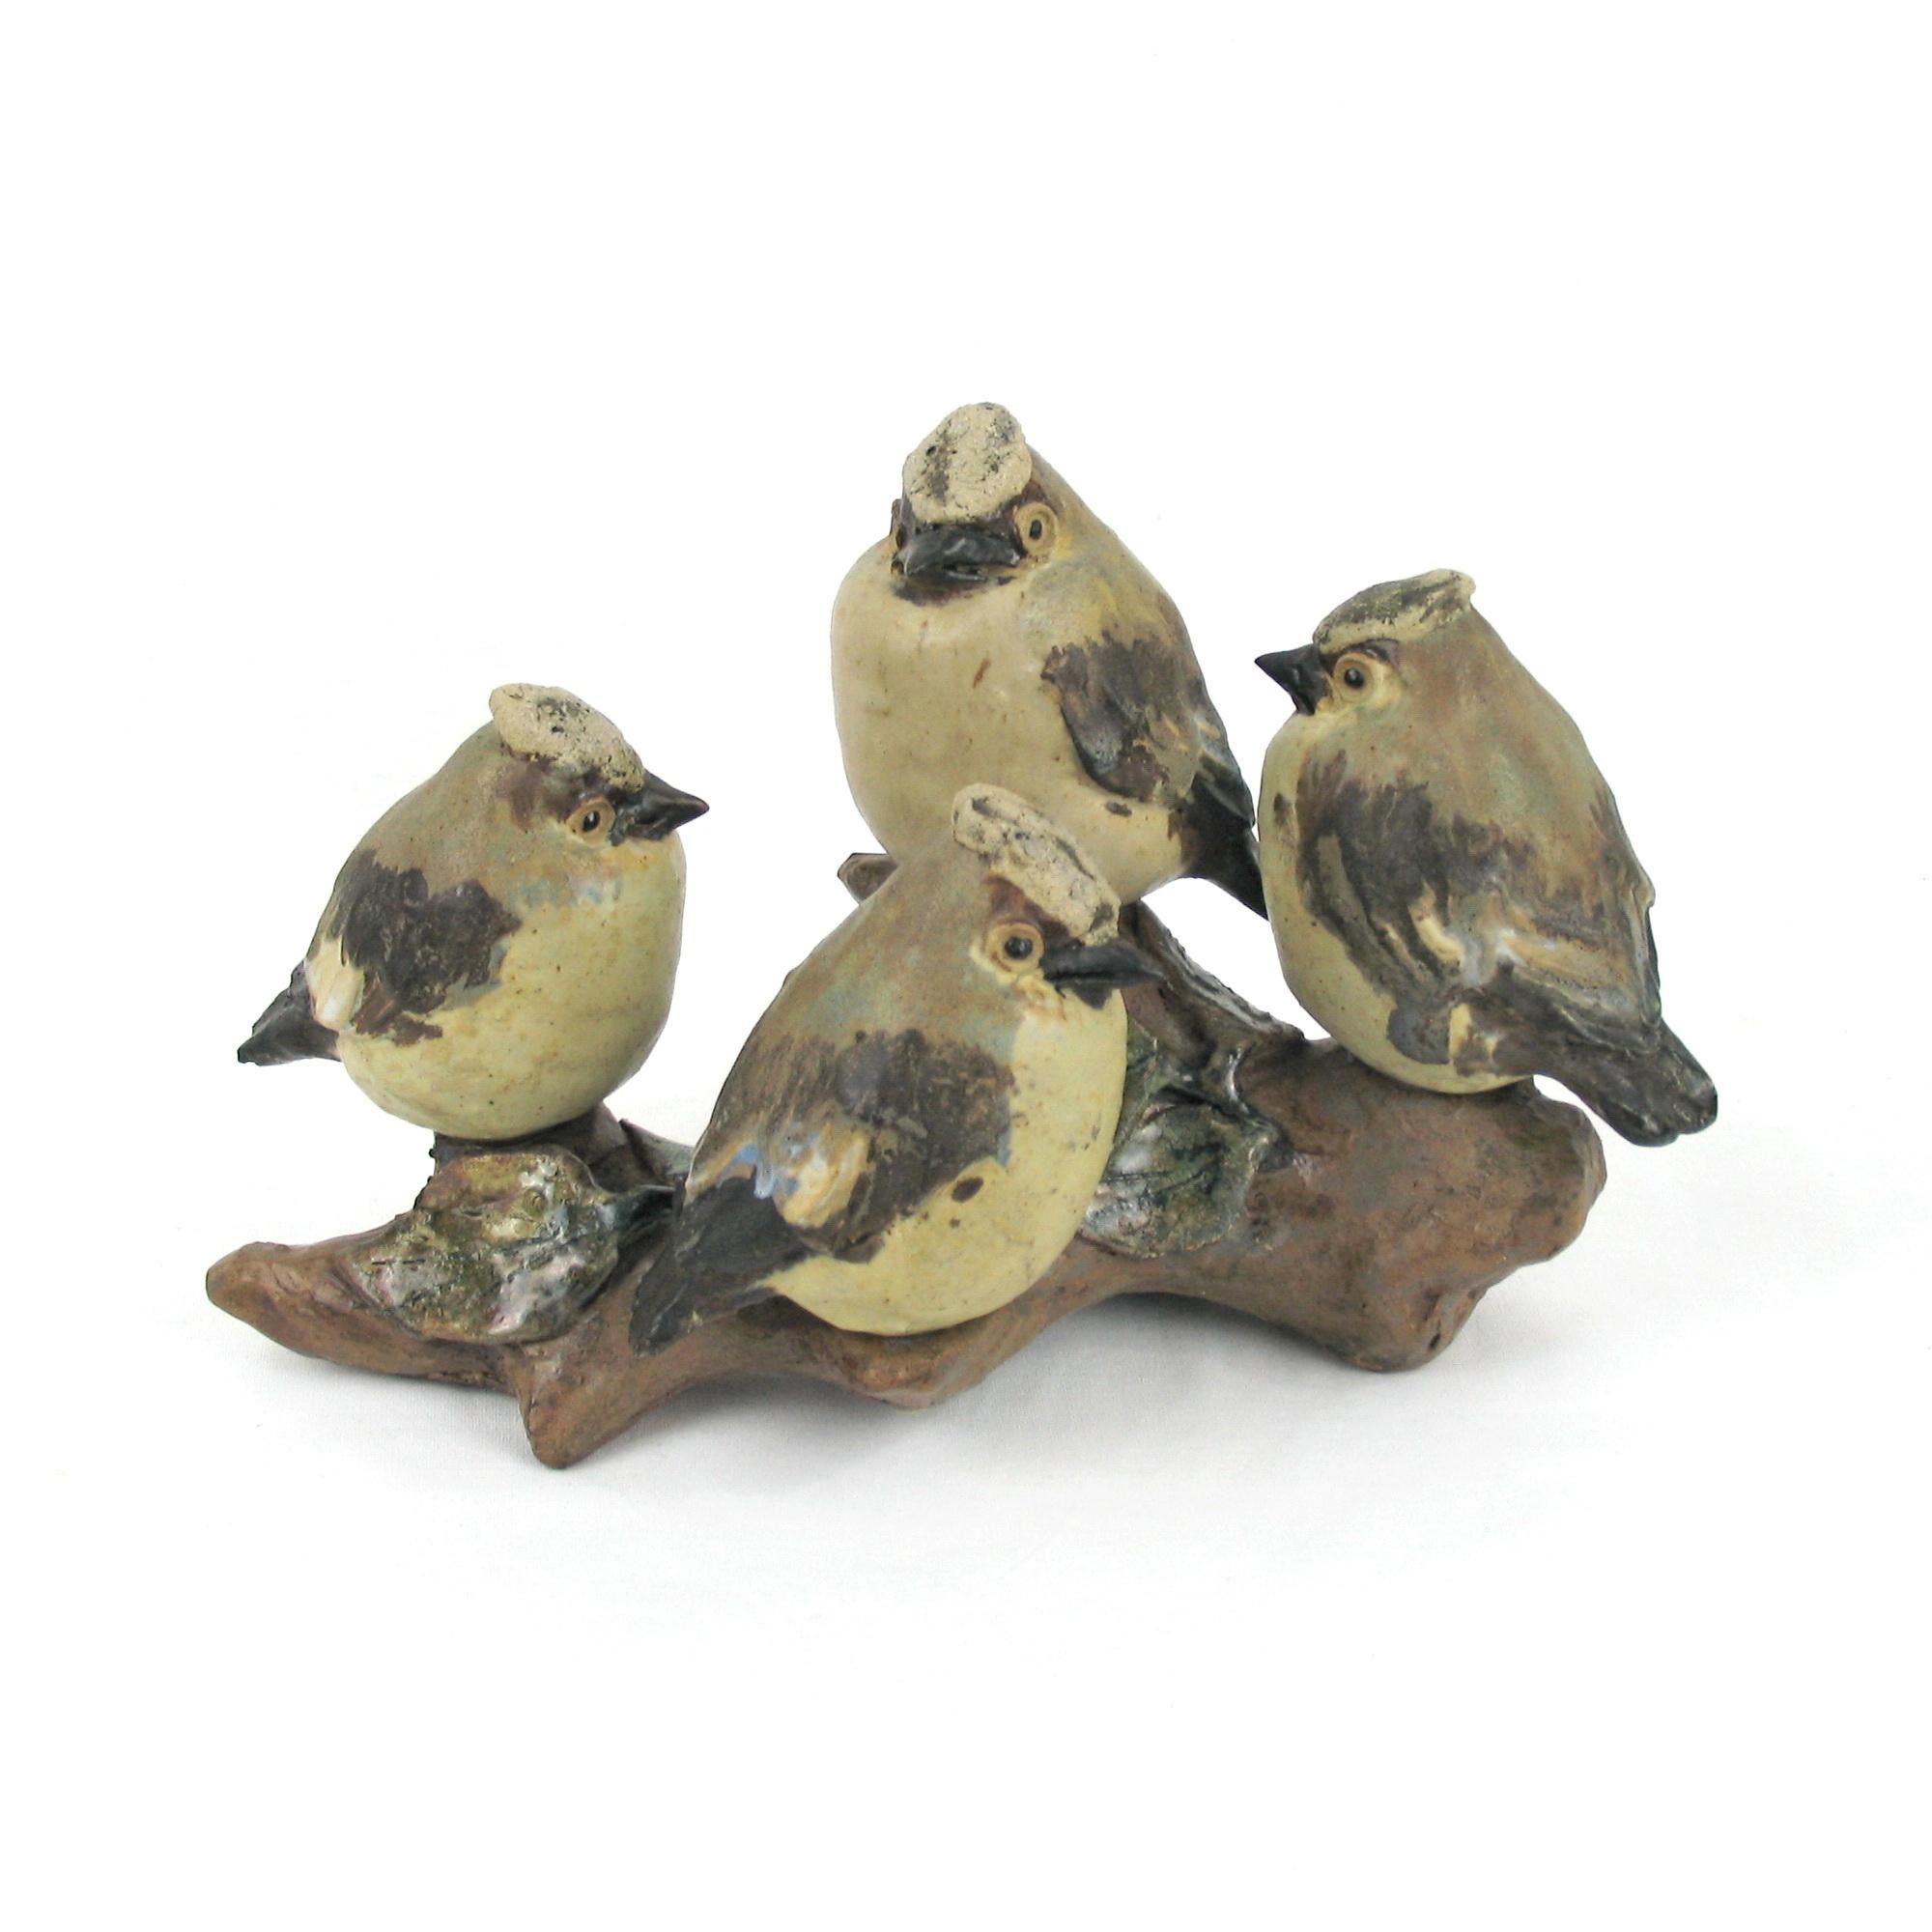 Mid-Century Modern Scandinavian ceramic birds sculpture, Sweden, 1960s.
Group sculpture of four joyful birds, sparrows, made of stoneware, in natural color, partly glazed in beautiful shades of blue. Signed under the bottom. In excellent